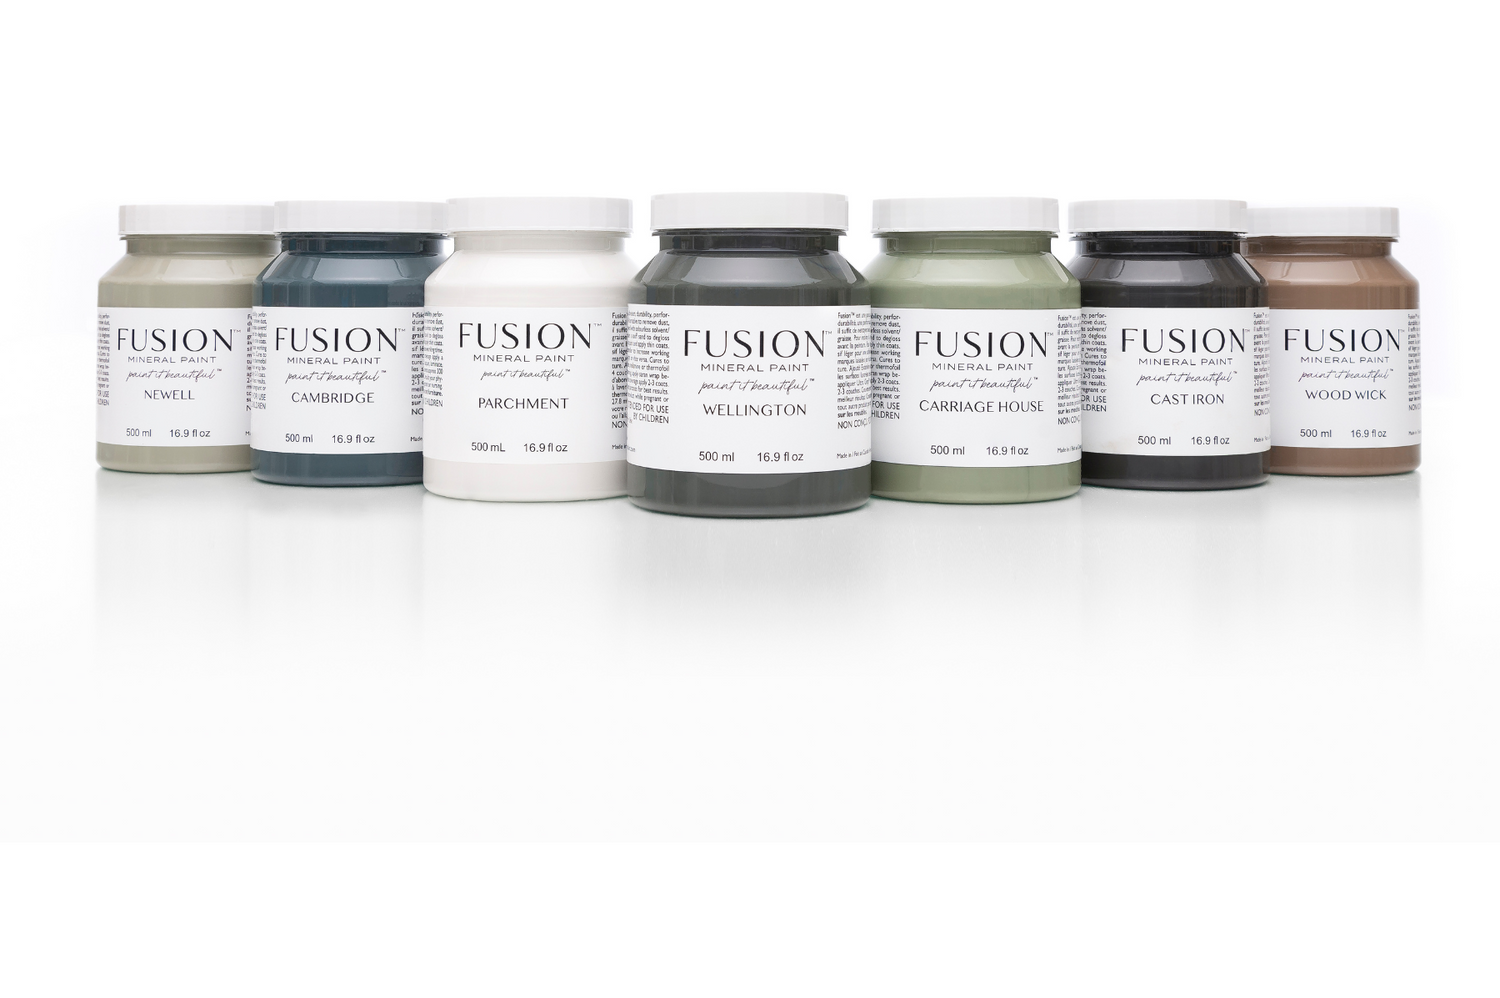 Fusion Mineral Paint<br/>BELLWOOD — VINTAGE 61 STOREHOUSE